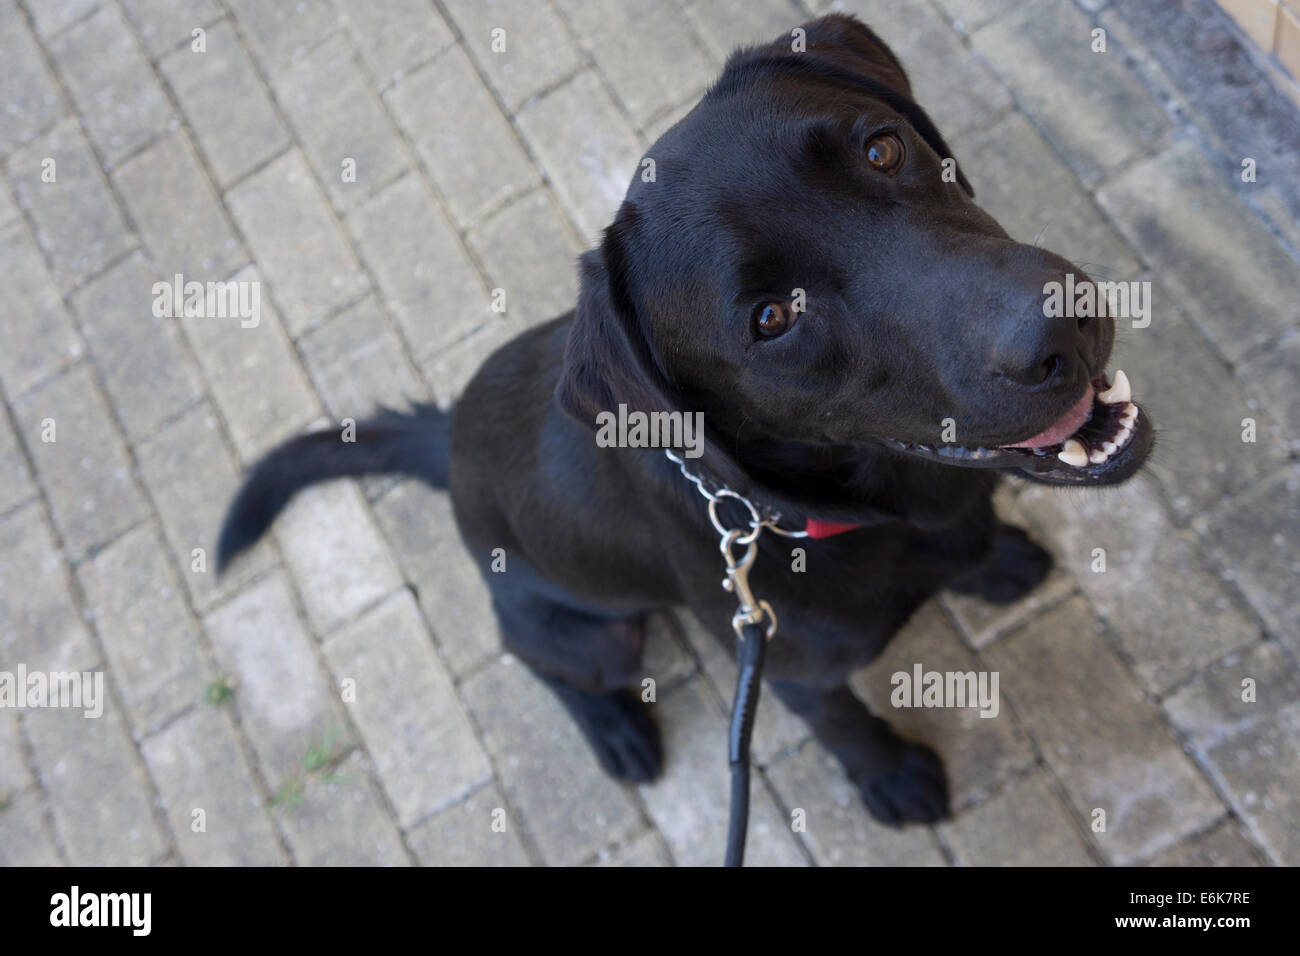 Black Labrador Retriever dog on leash sitting and looking up Stock Photo